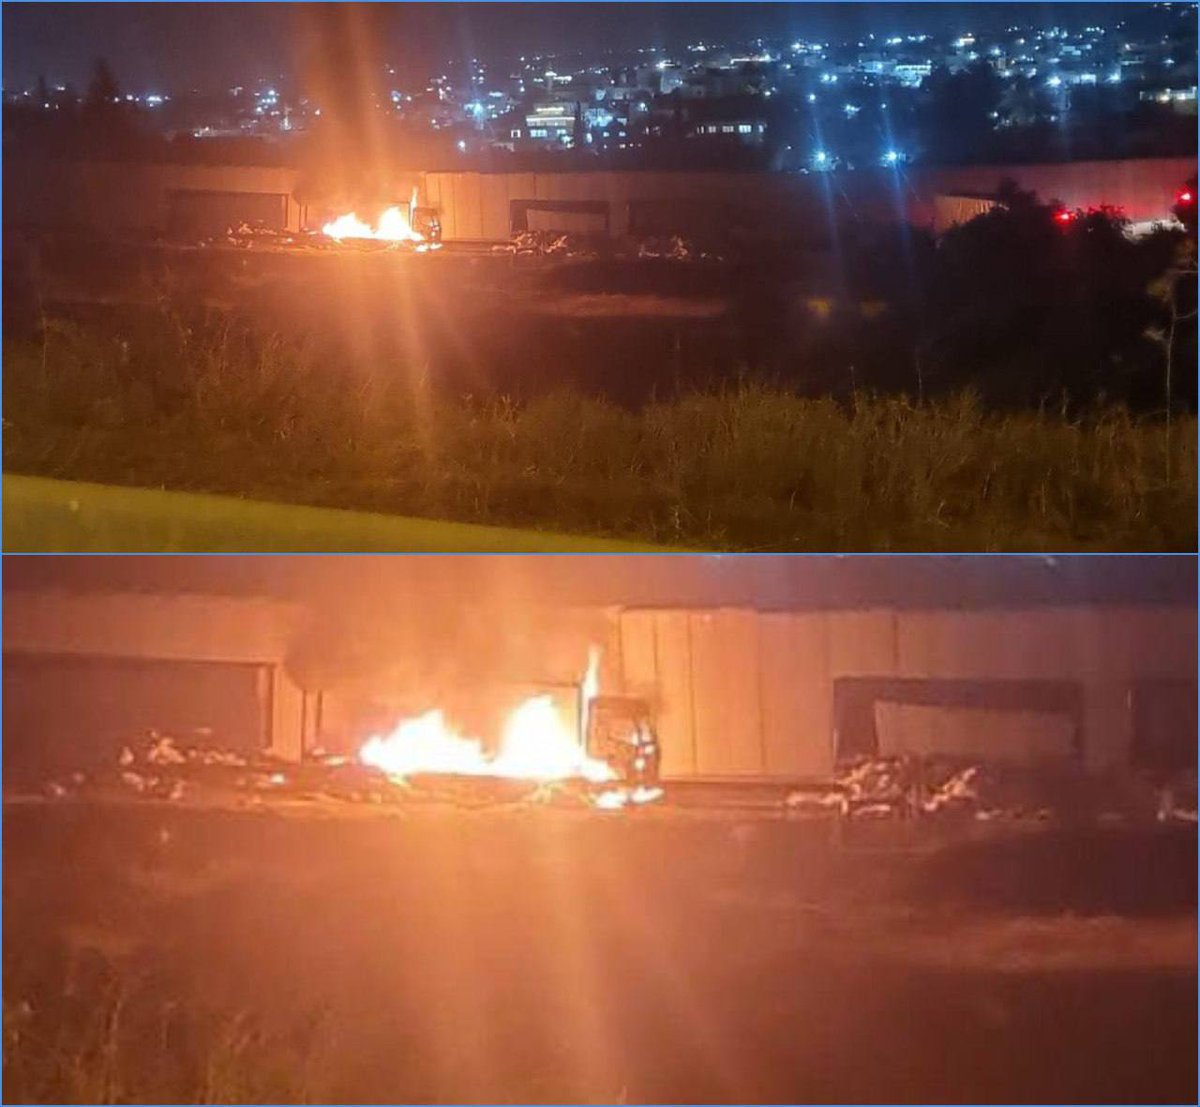 Israeli settler mobs have launched attacks on humanitarian aid convoys traveling to the Gaza Strip from Jordan, setting trucks on fire. These attacks occur with the complete disappearance of Israeli forces and authorities, suggesting full collaboration between the Israeli…